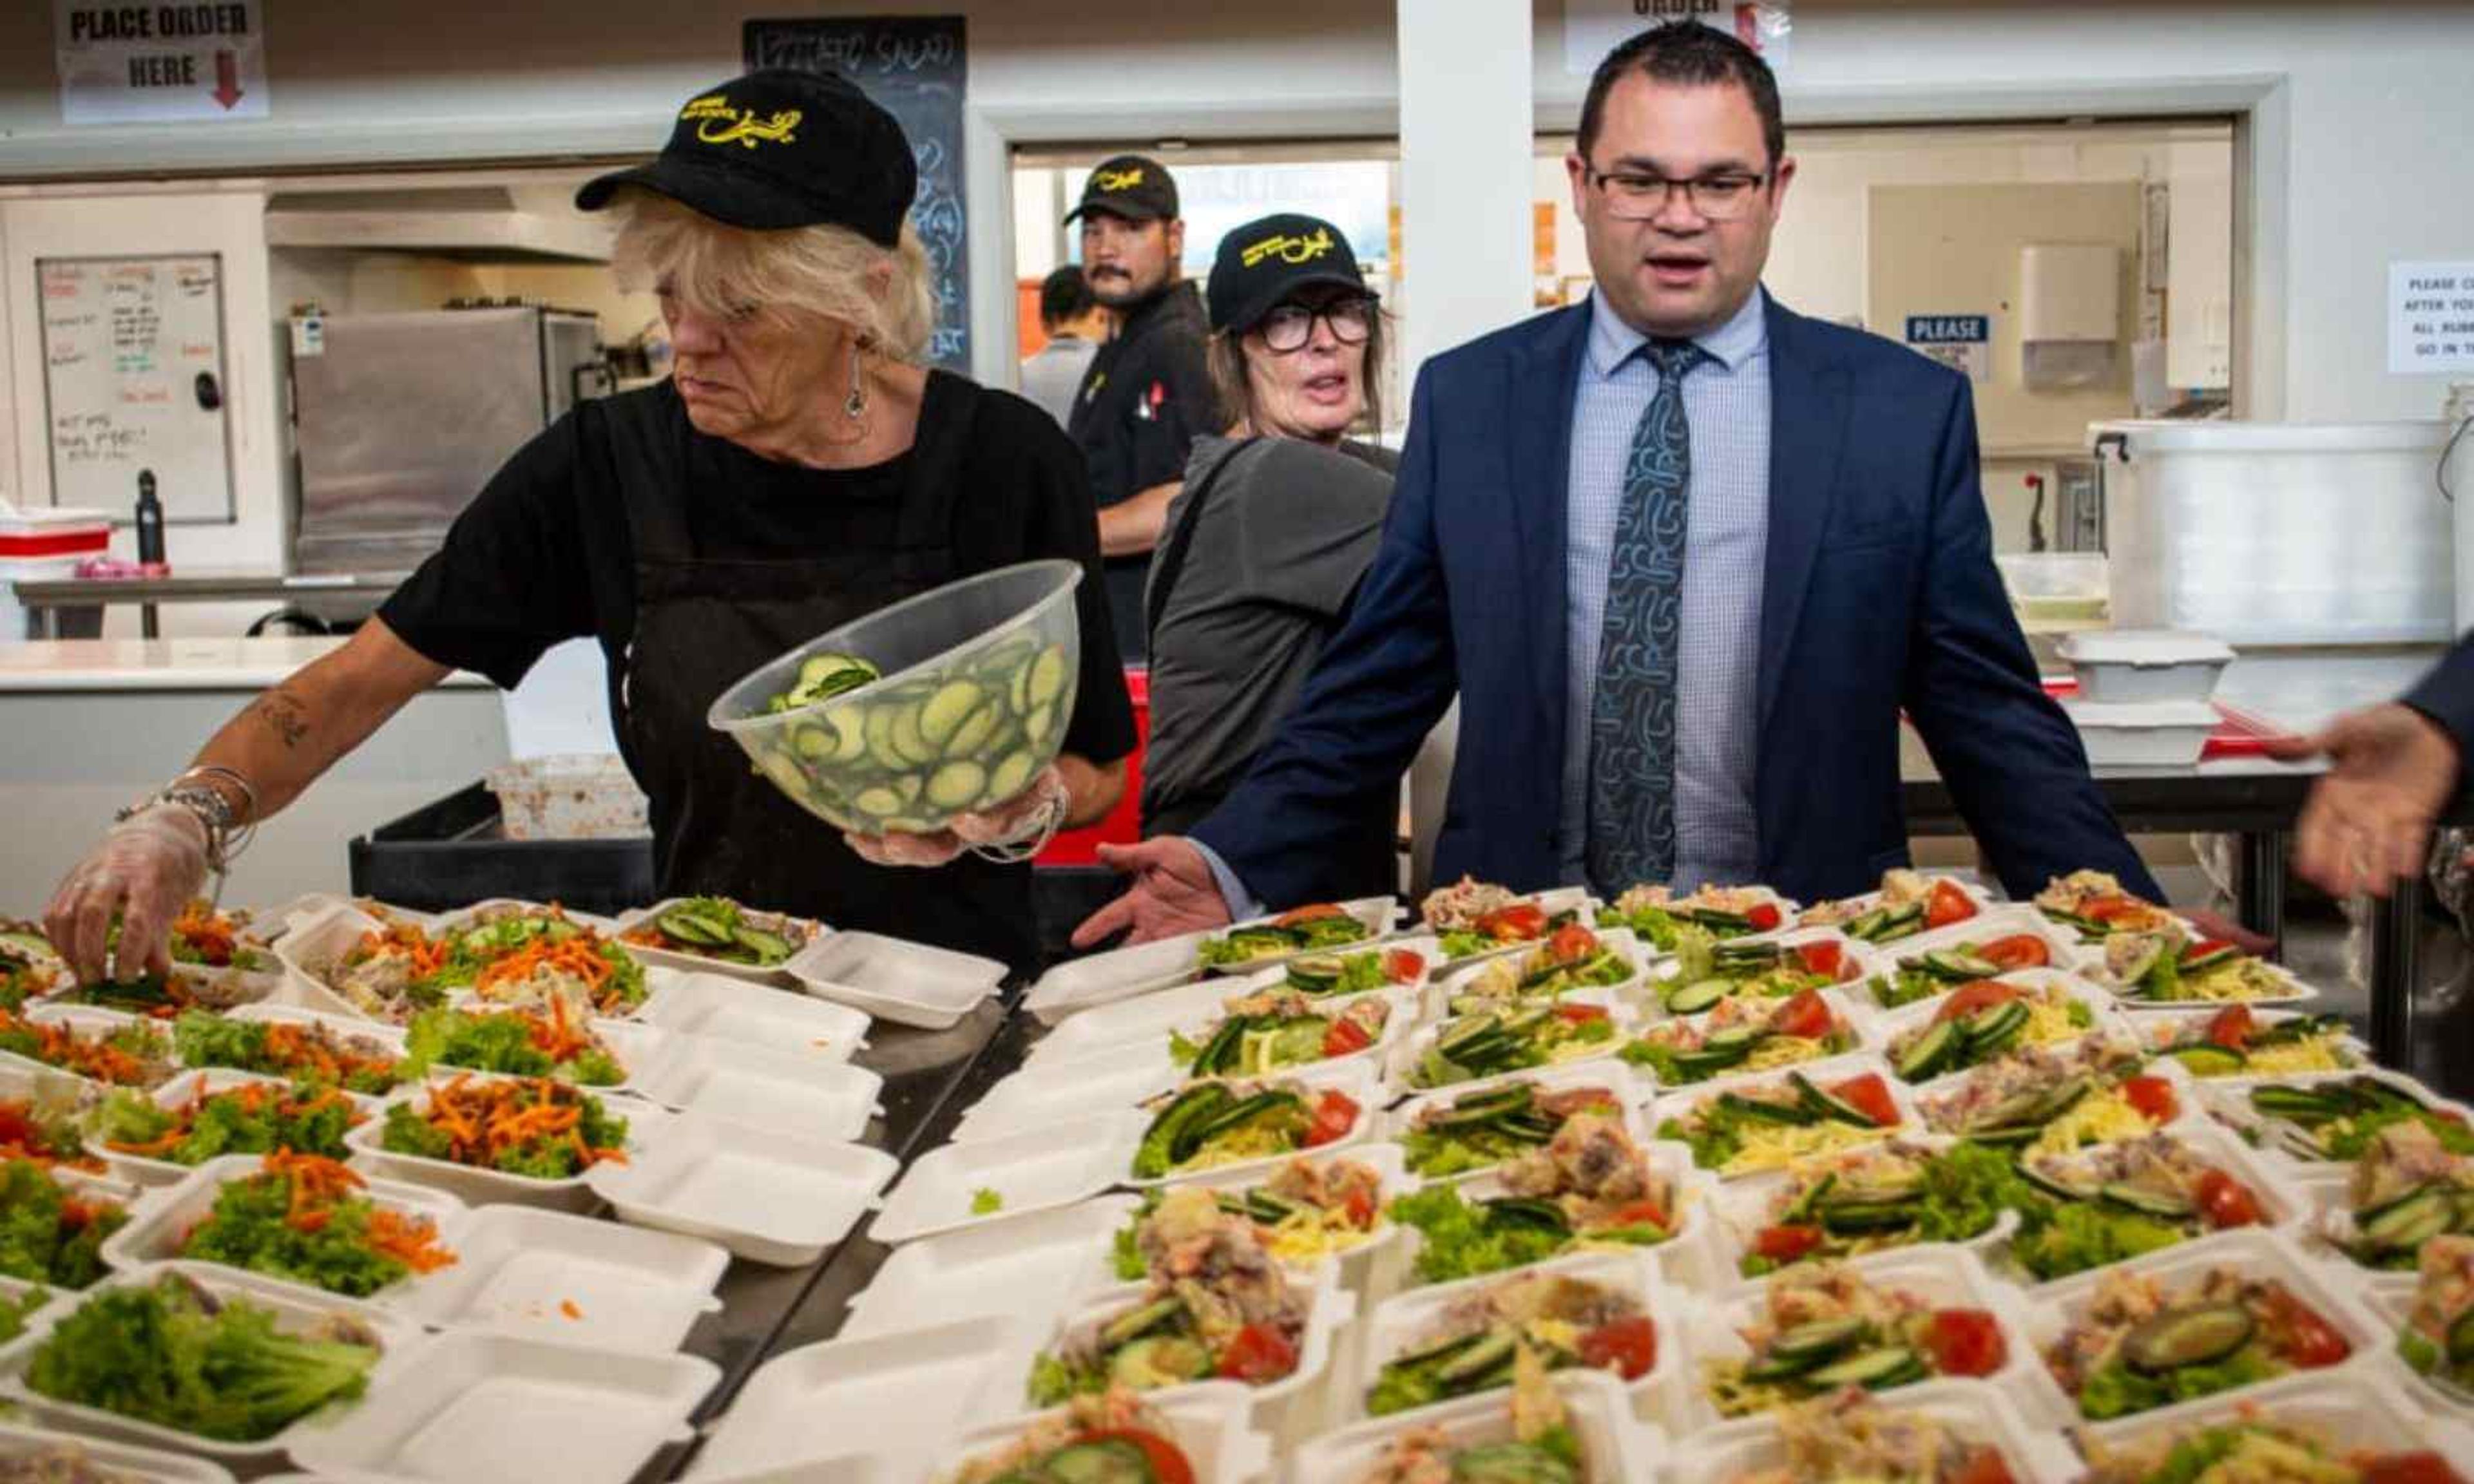 Palmerston North Labour MP Tangi Utikere visits the Healthy Lunches project at Freyberg High School.